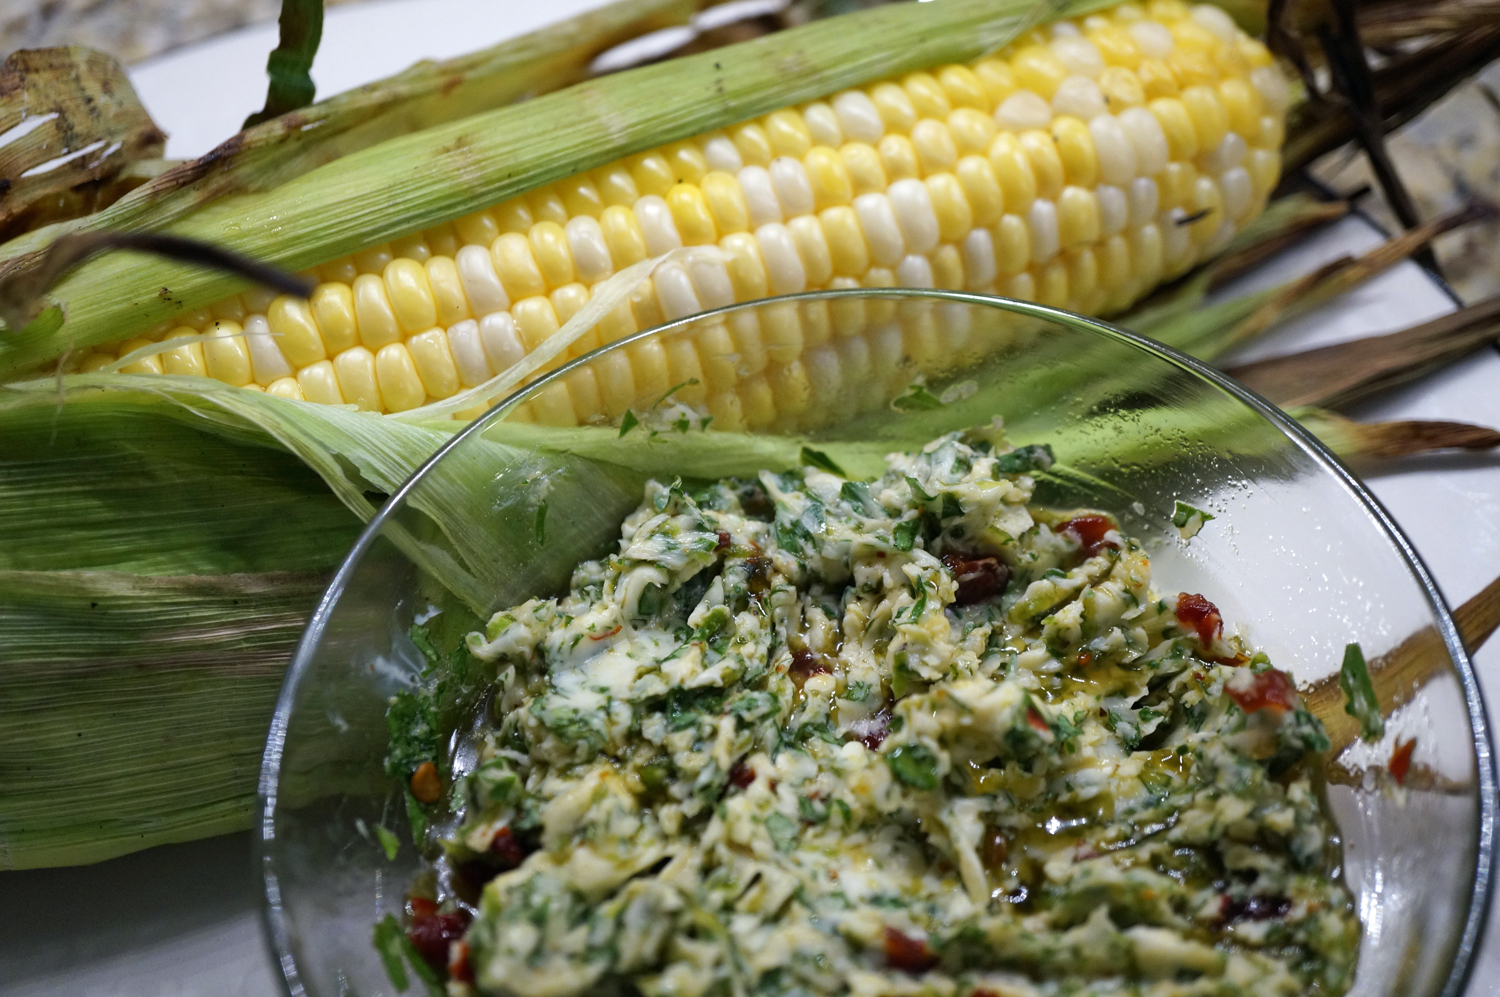 Grilled Corn on the Cob with Chipotle Lime Butter